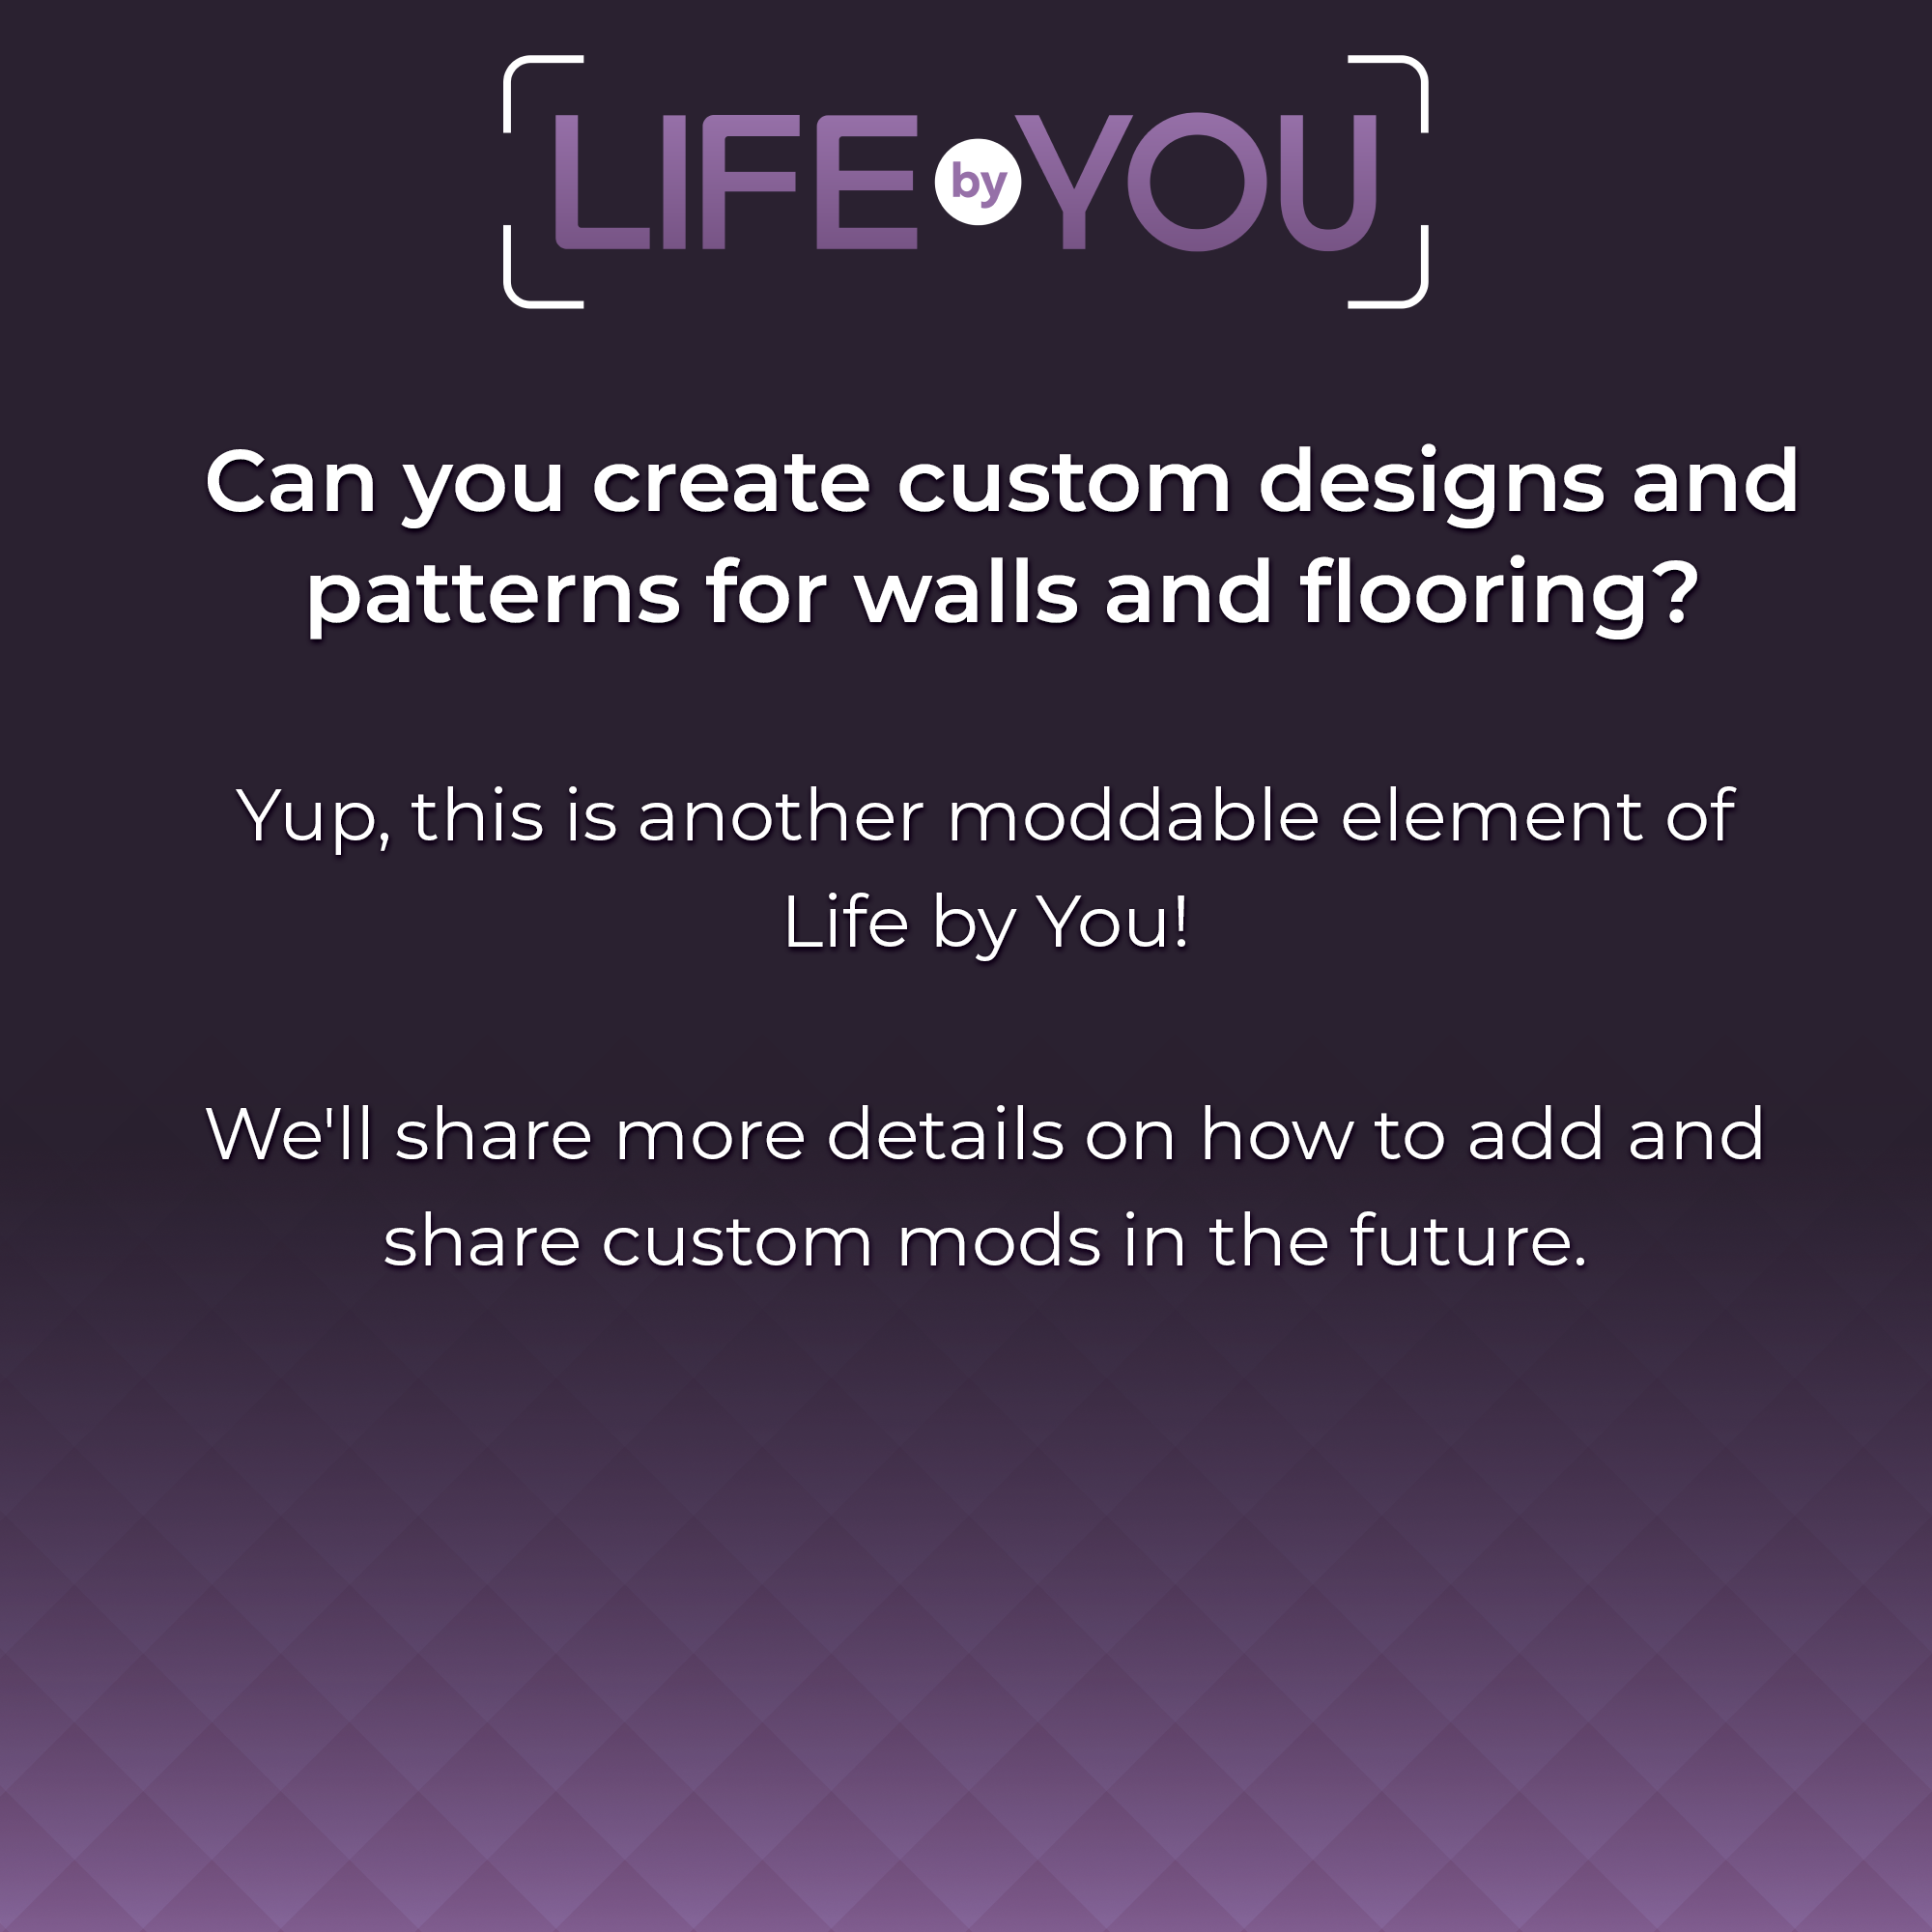 QnA Can you create custom patterns for walls and flooring?